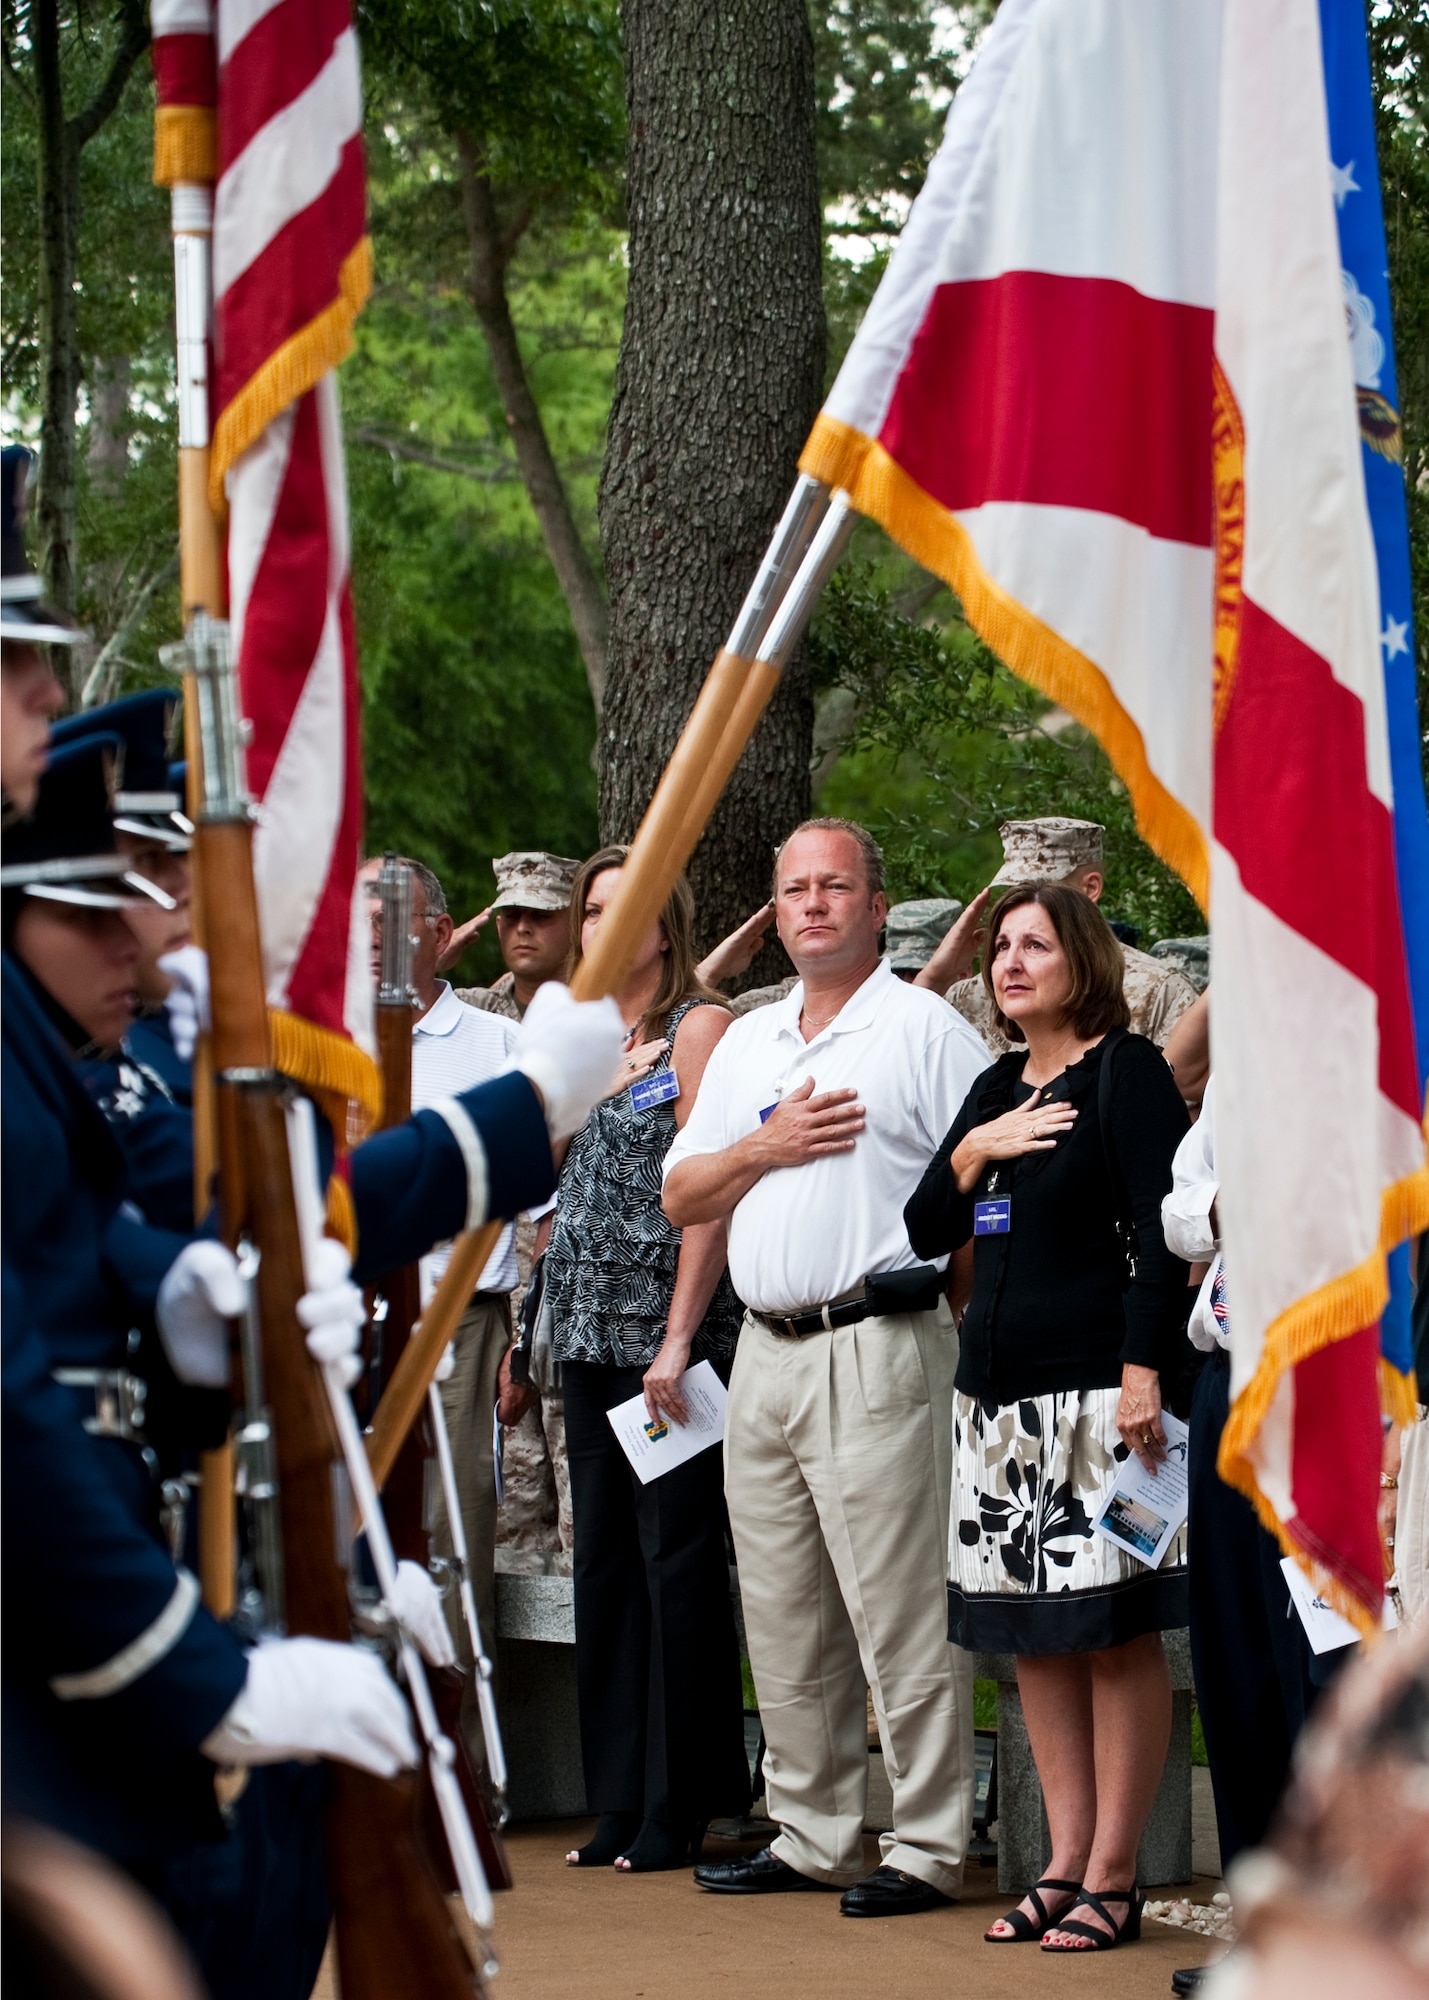 Family members of victims of the Khobar Towers bombing watch as the colors are presented at the Khobar Towers Memorial ceremony June 24, 2011, at Eglin Air Force Base, Fla. June 25 marks the 15th anniversary of the bombing. (U.S. Air Force photo/Samuel King Jr.)